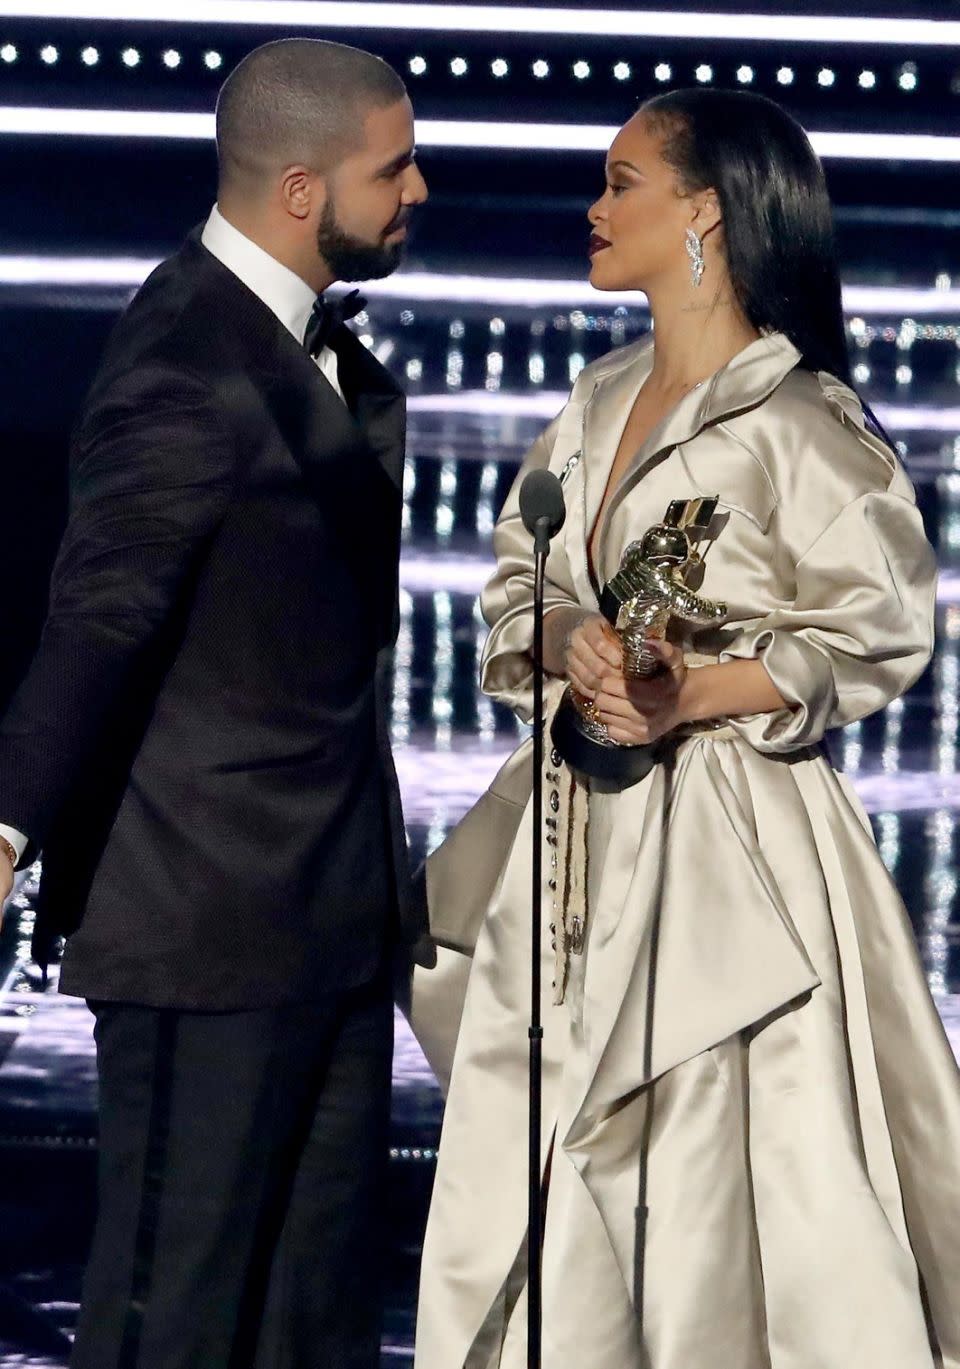 She has also been rumoured to have dated longtime pal Drake. He presented her The Video Vanguard Award during the 2016 MTV Video Music Awards. Source: Getty